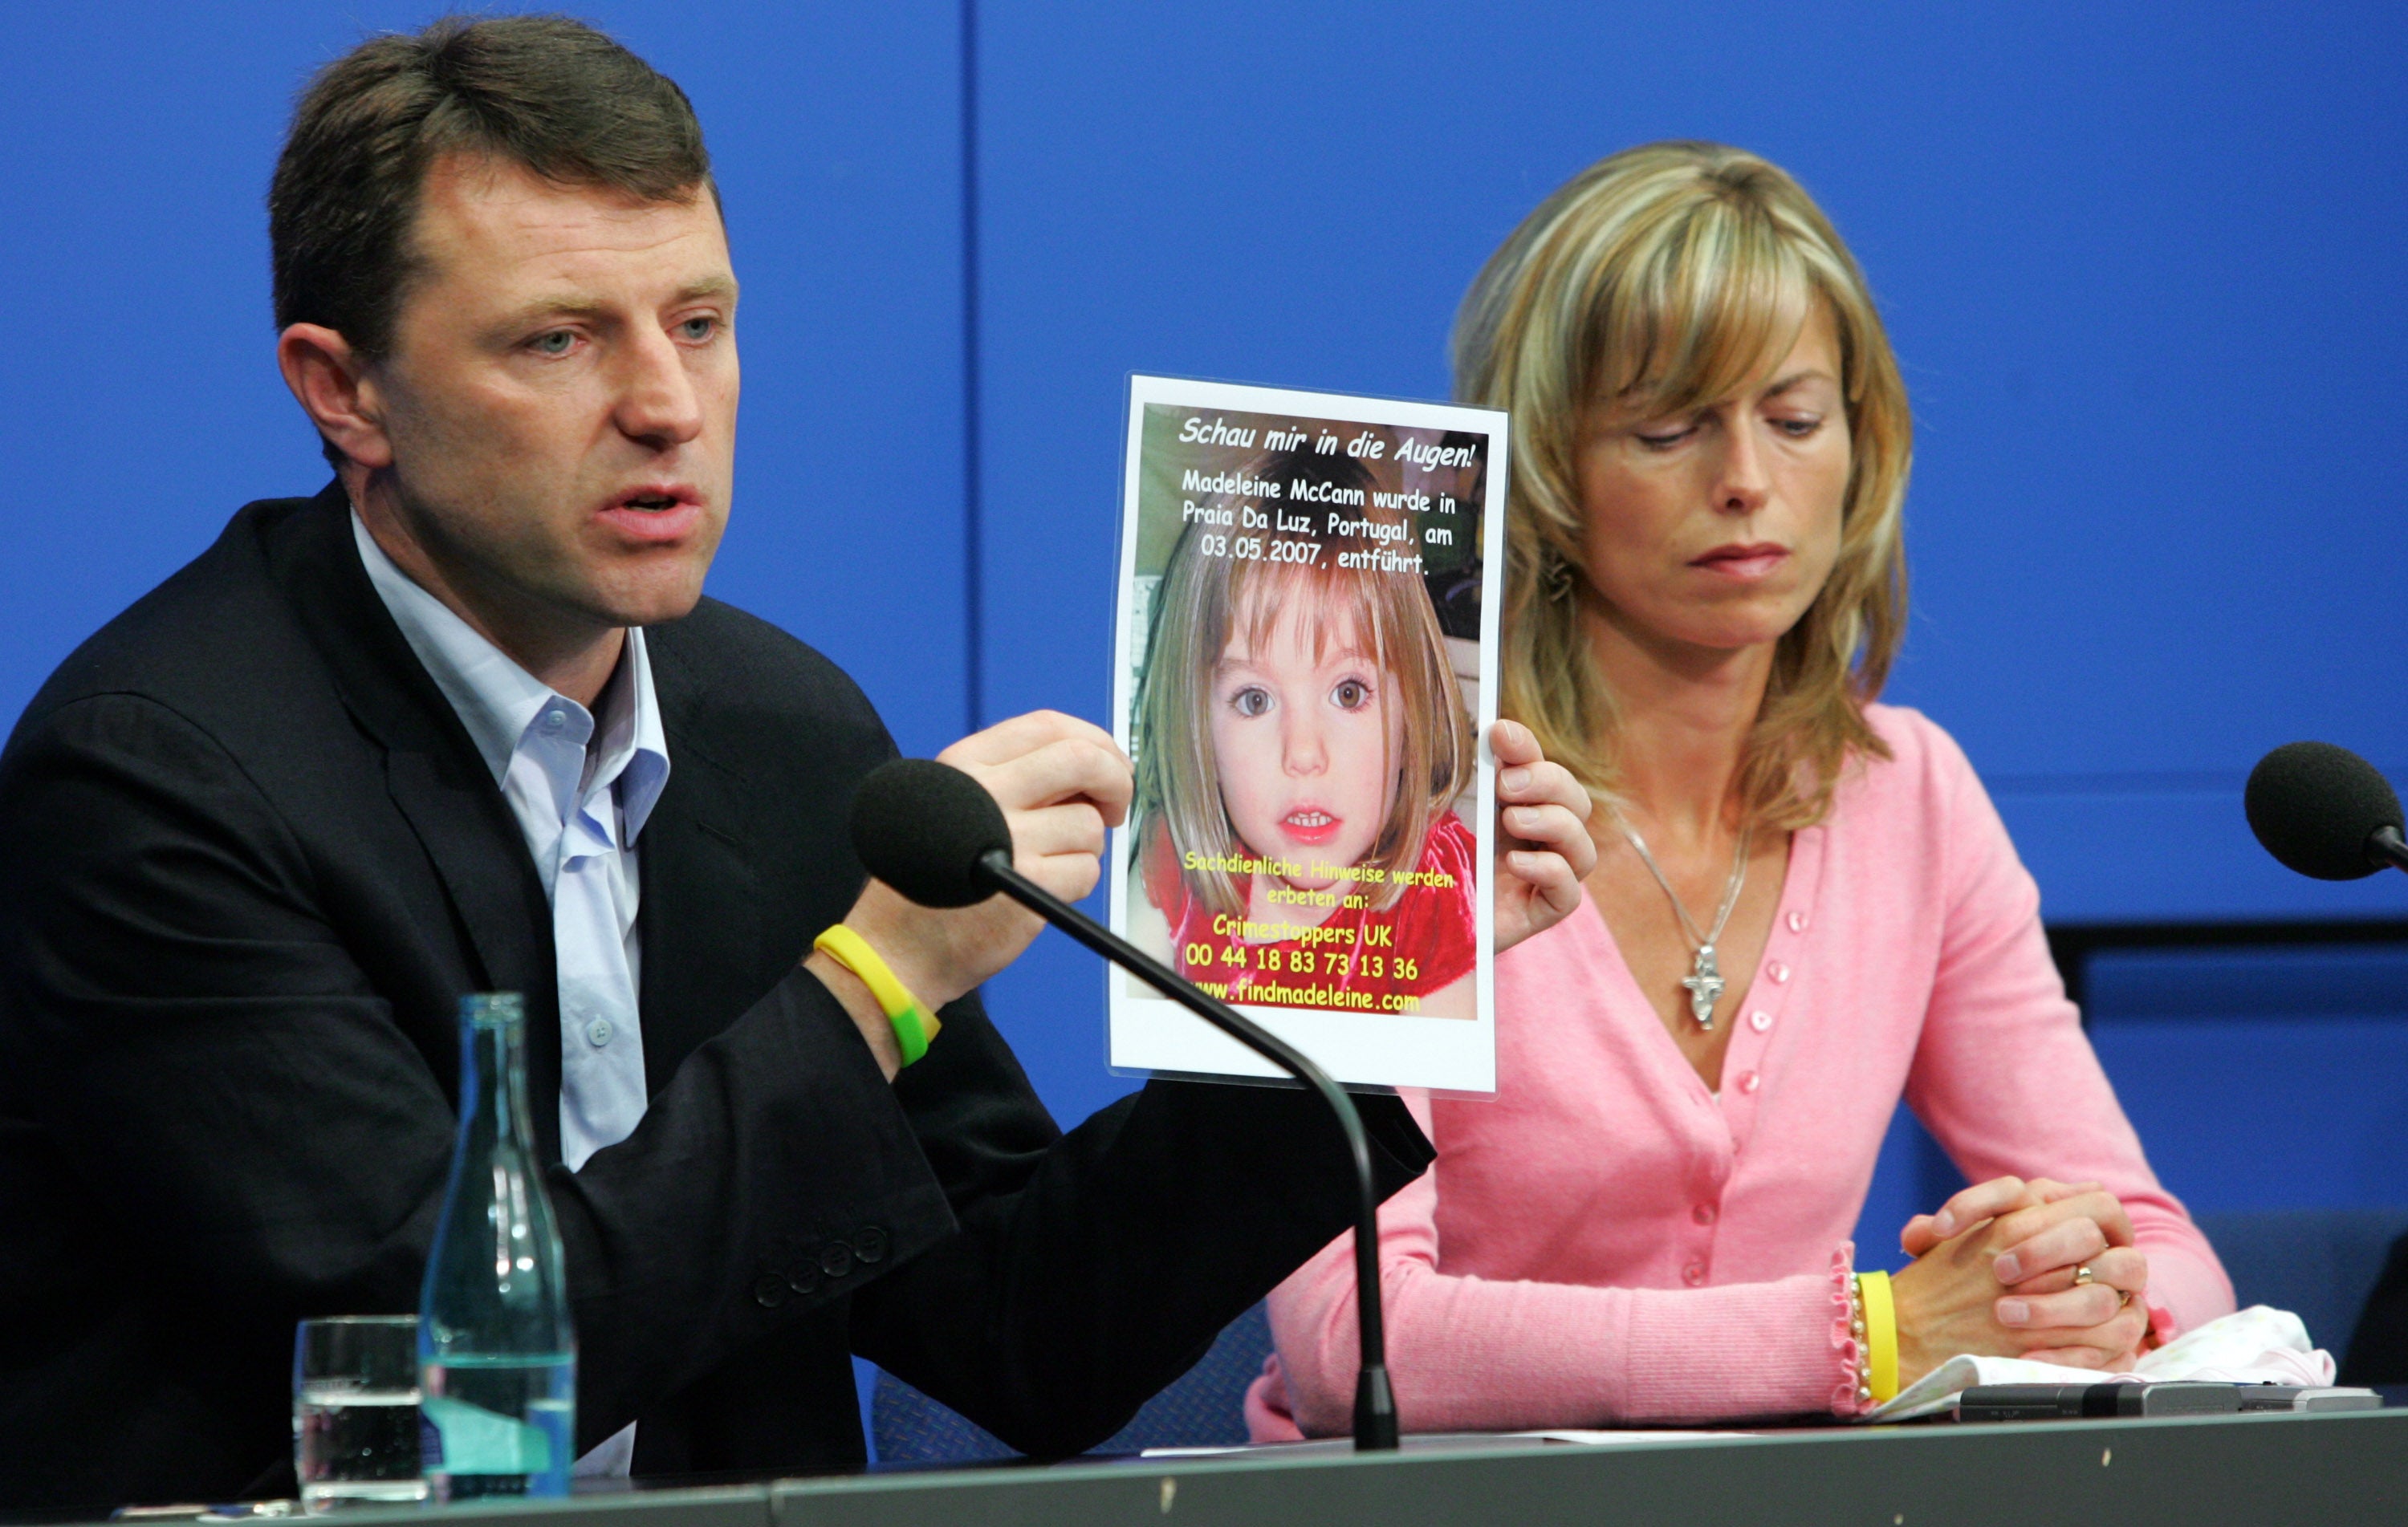 Parents Kate and Gerry McCann still don’t know what happened to their daughter